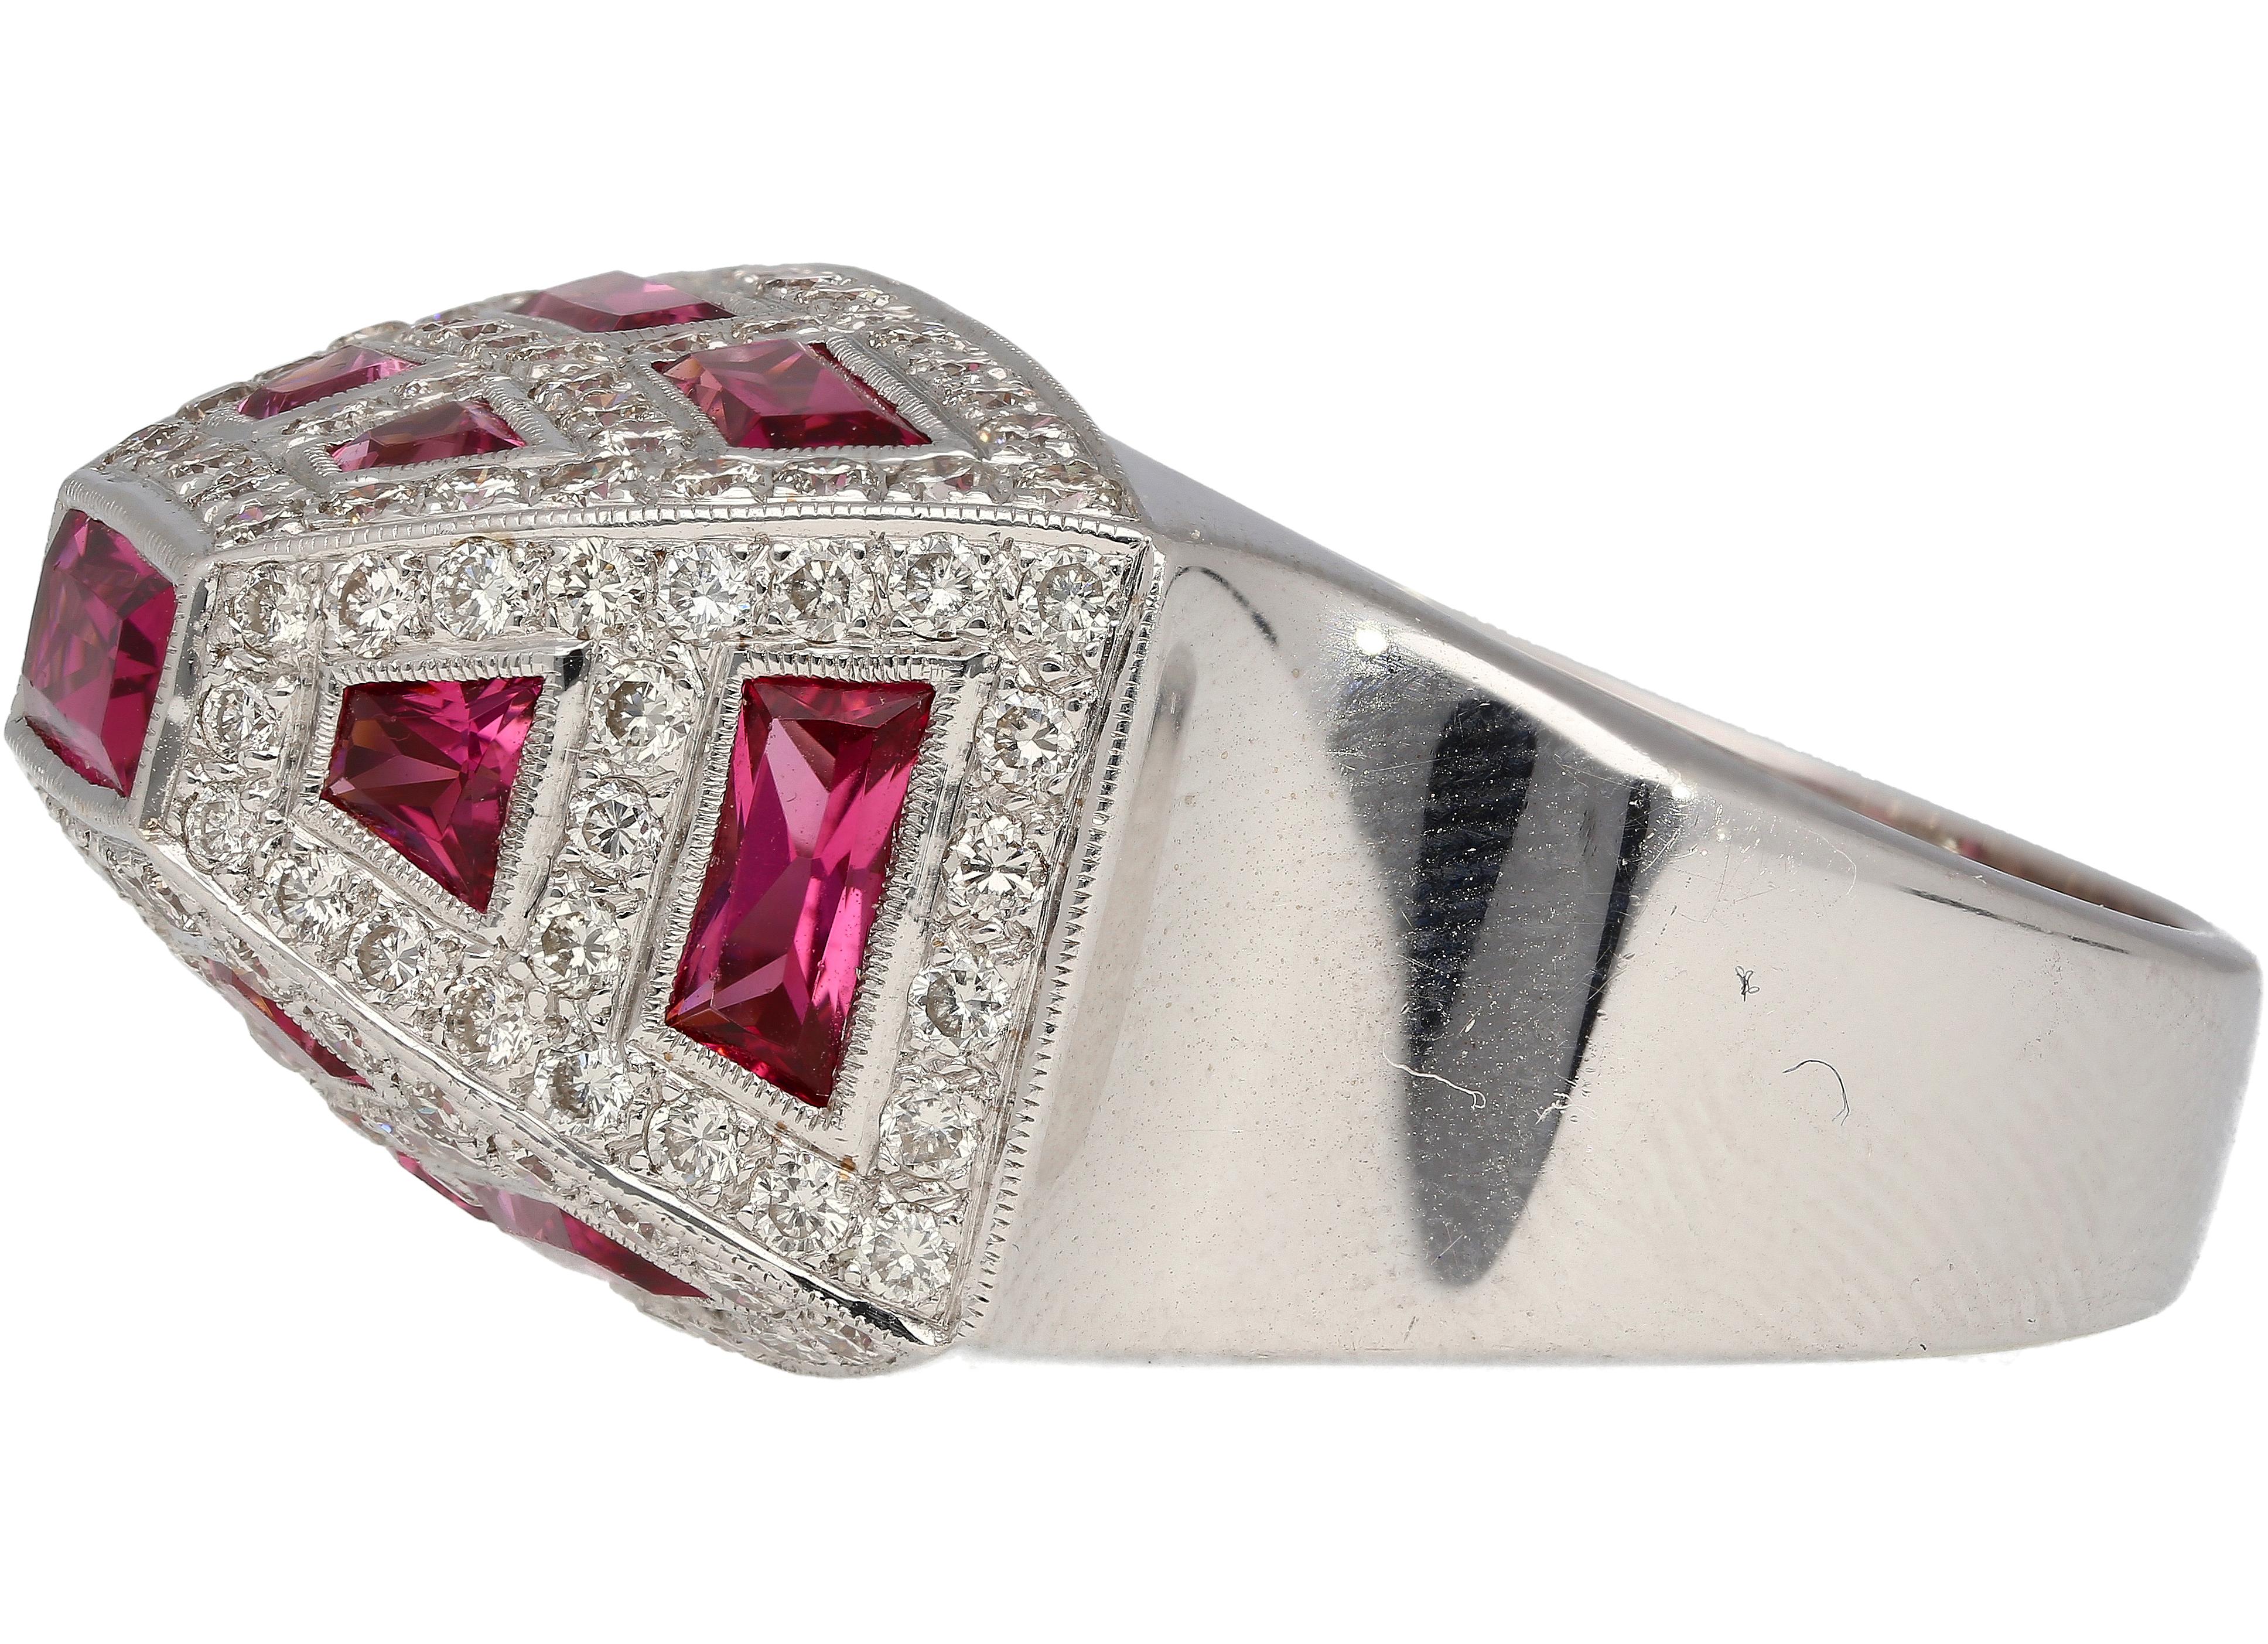 Baguette Cut Pyramid Shaped Pink Tourmaline and Diamond Cluster Men's Ring in 18k White Gold